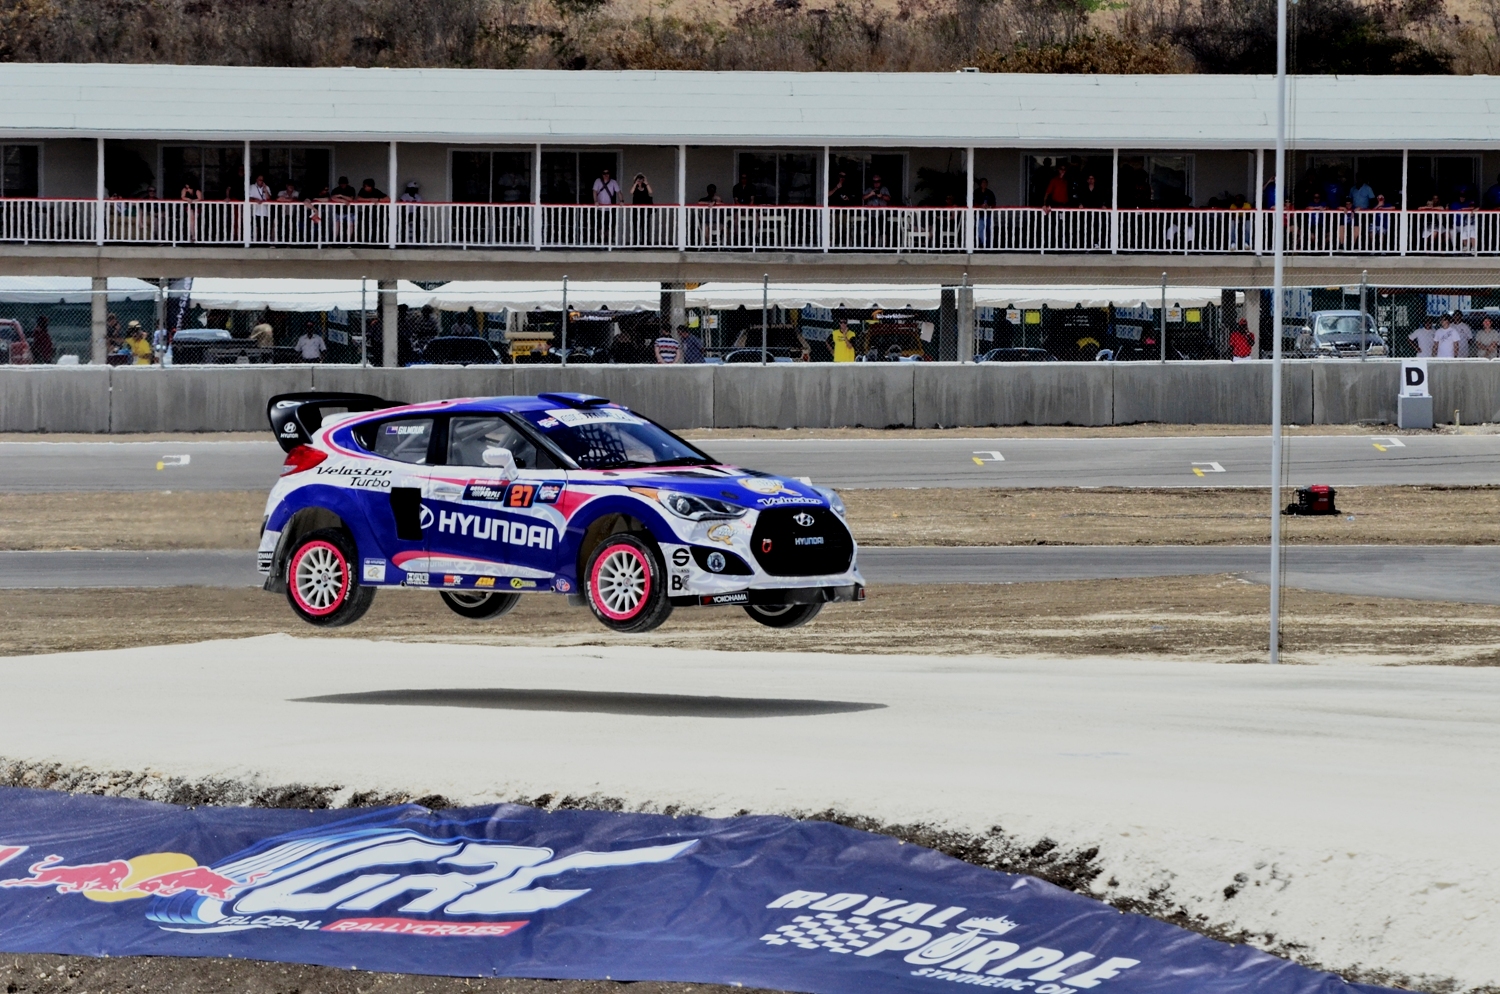 New Zealand’s Emma Gilmour flies over a jump in her Rhys Millen Racing Hyundai Veloster Turbo at the Red Bull Global Rallycross Championship’s (GRC) first round in Barbados this weekend. Photo credit Nigel Browne.